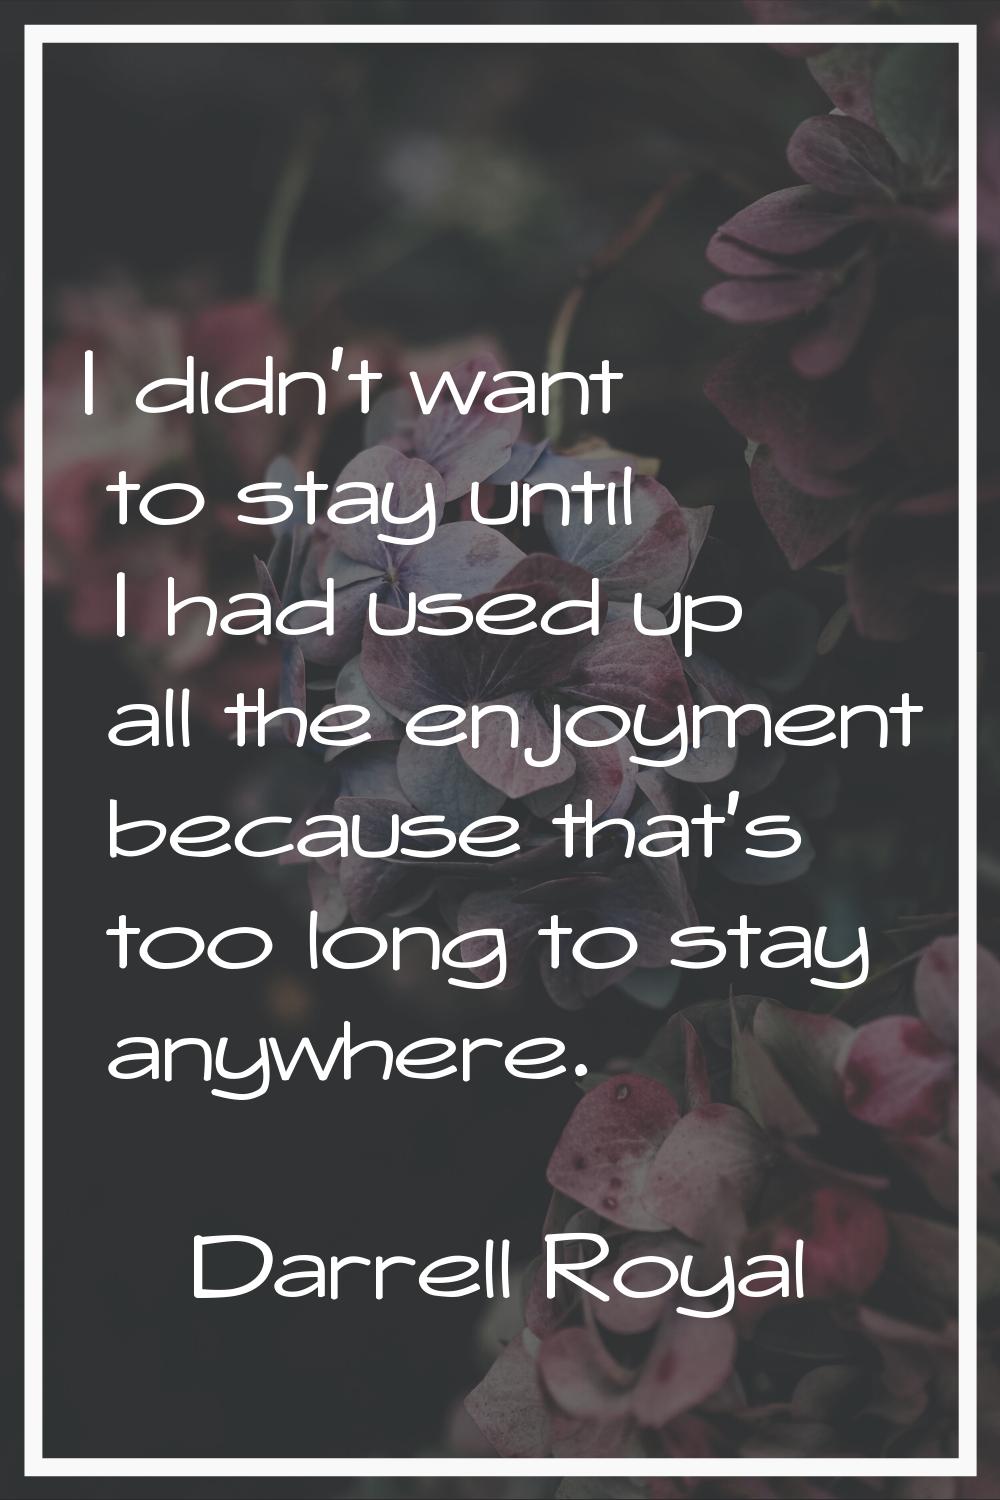 I didn't want to stay until I had used up all the enjoyment because that's too long to stay anywher